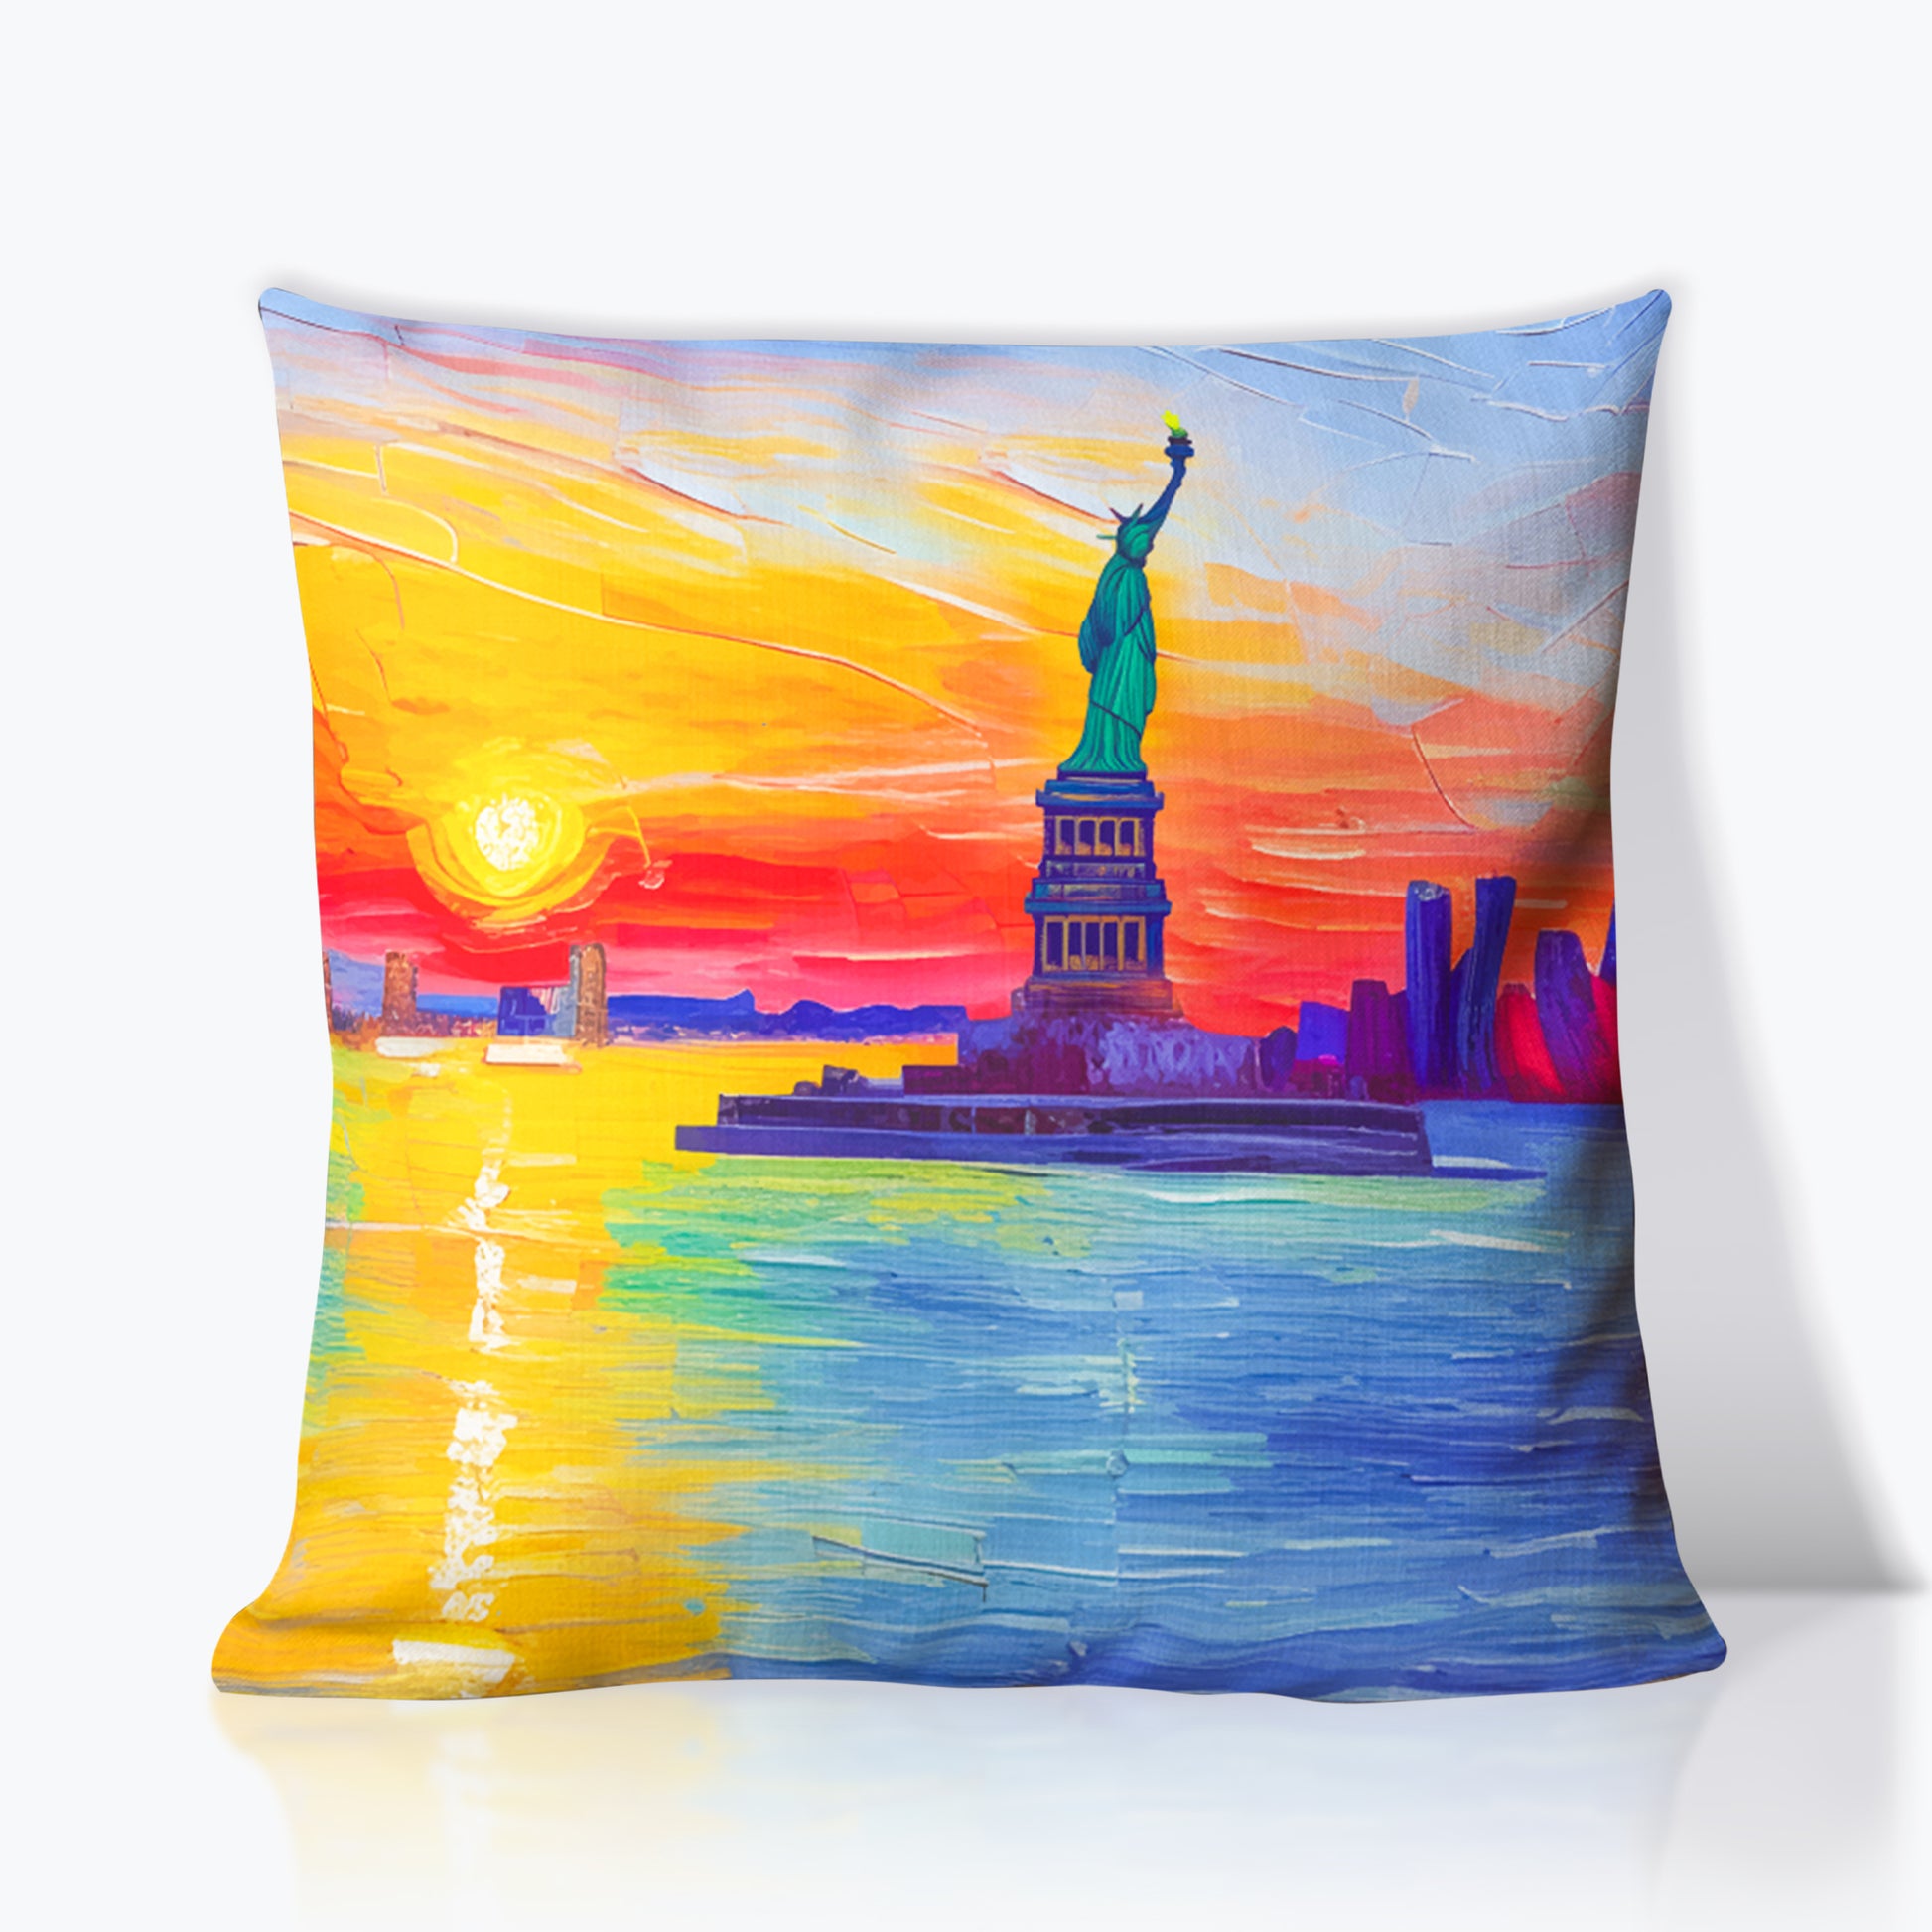 Premium Pillow - New York | Luxurious and comfortable accent for your home decor | Seepu